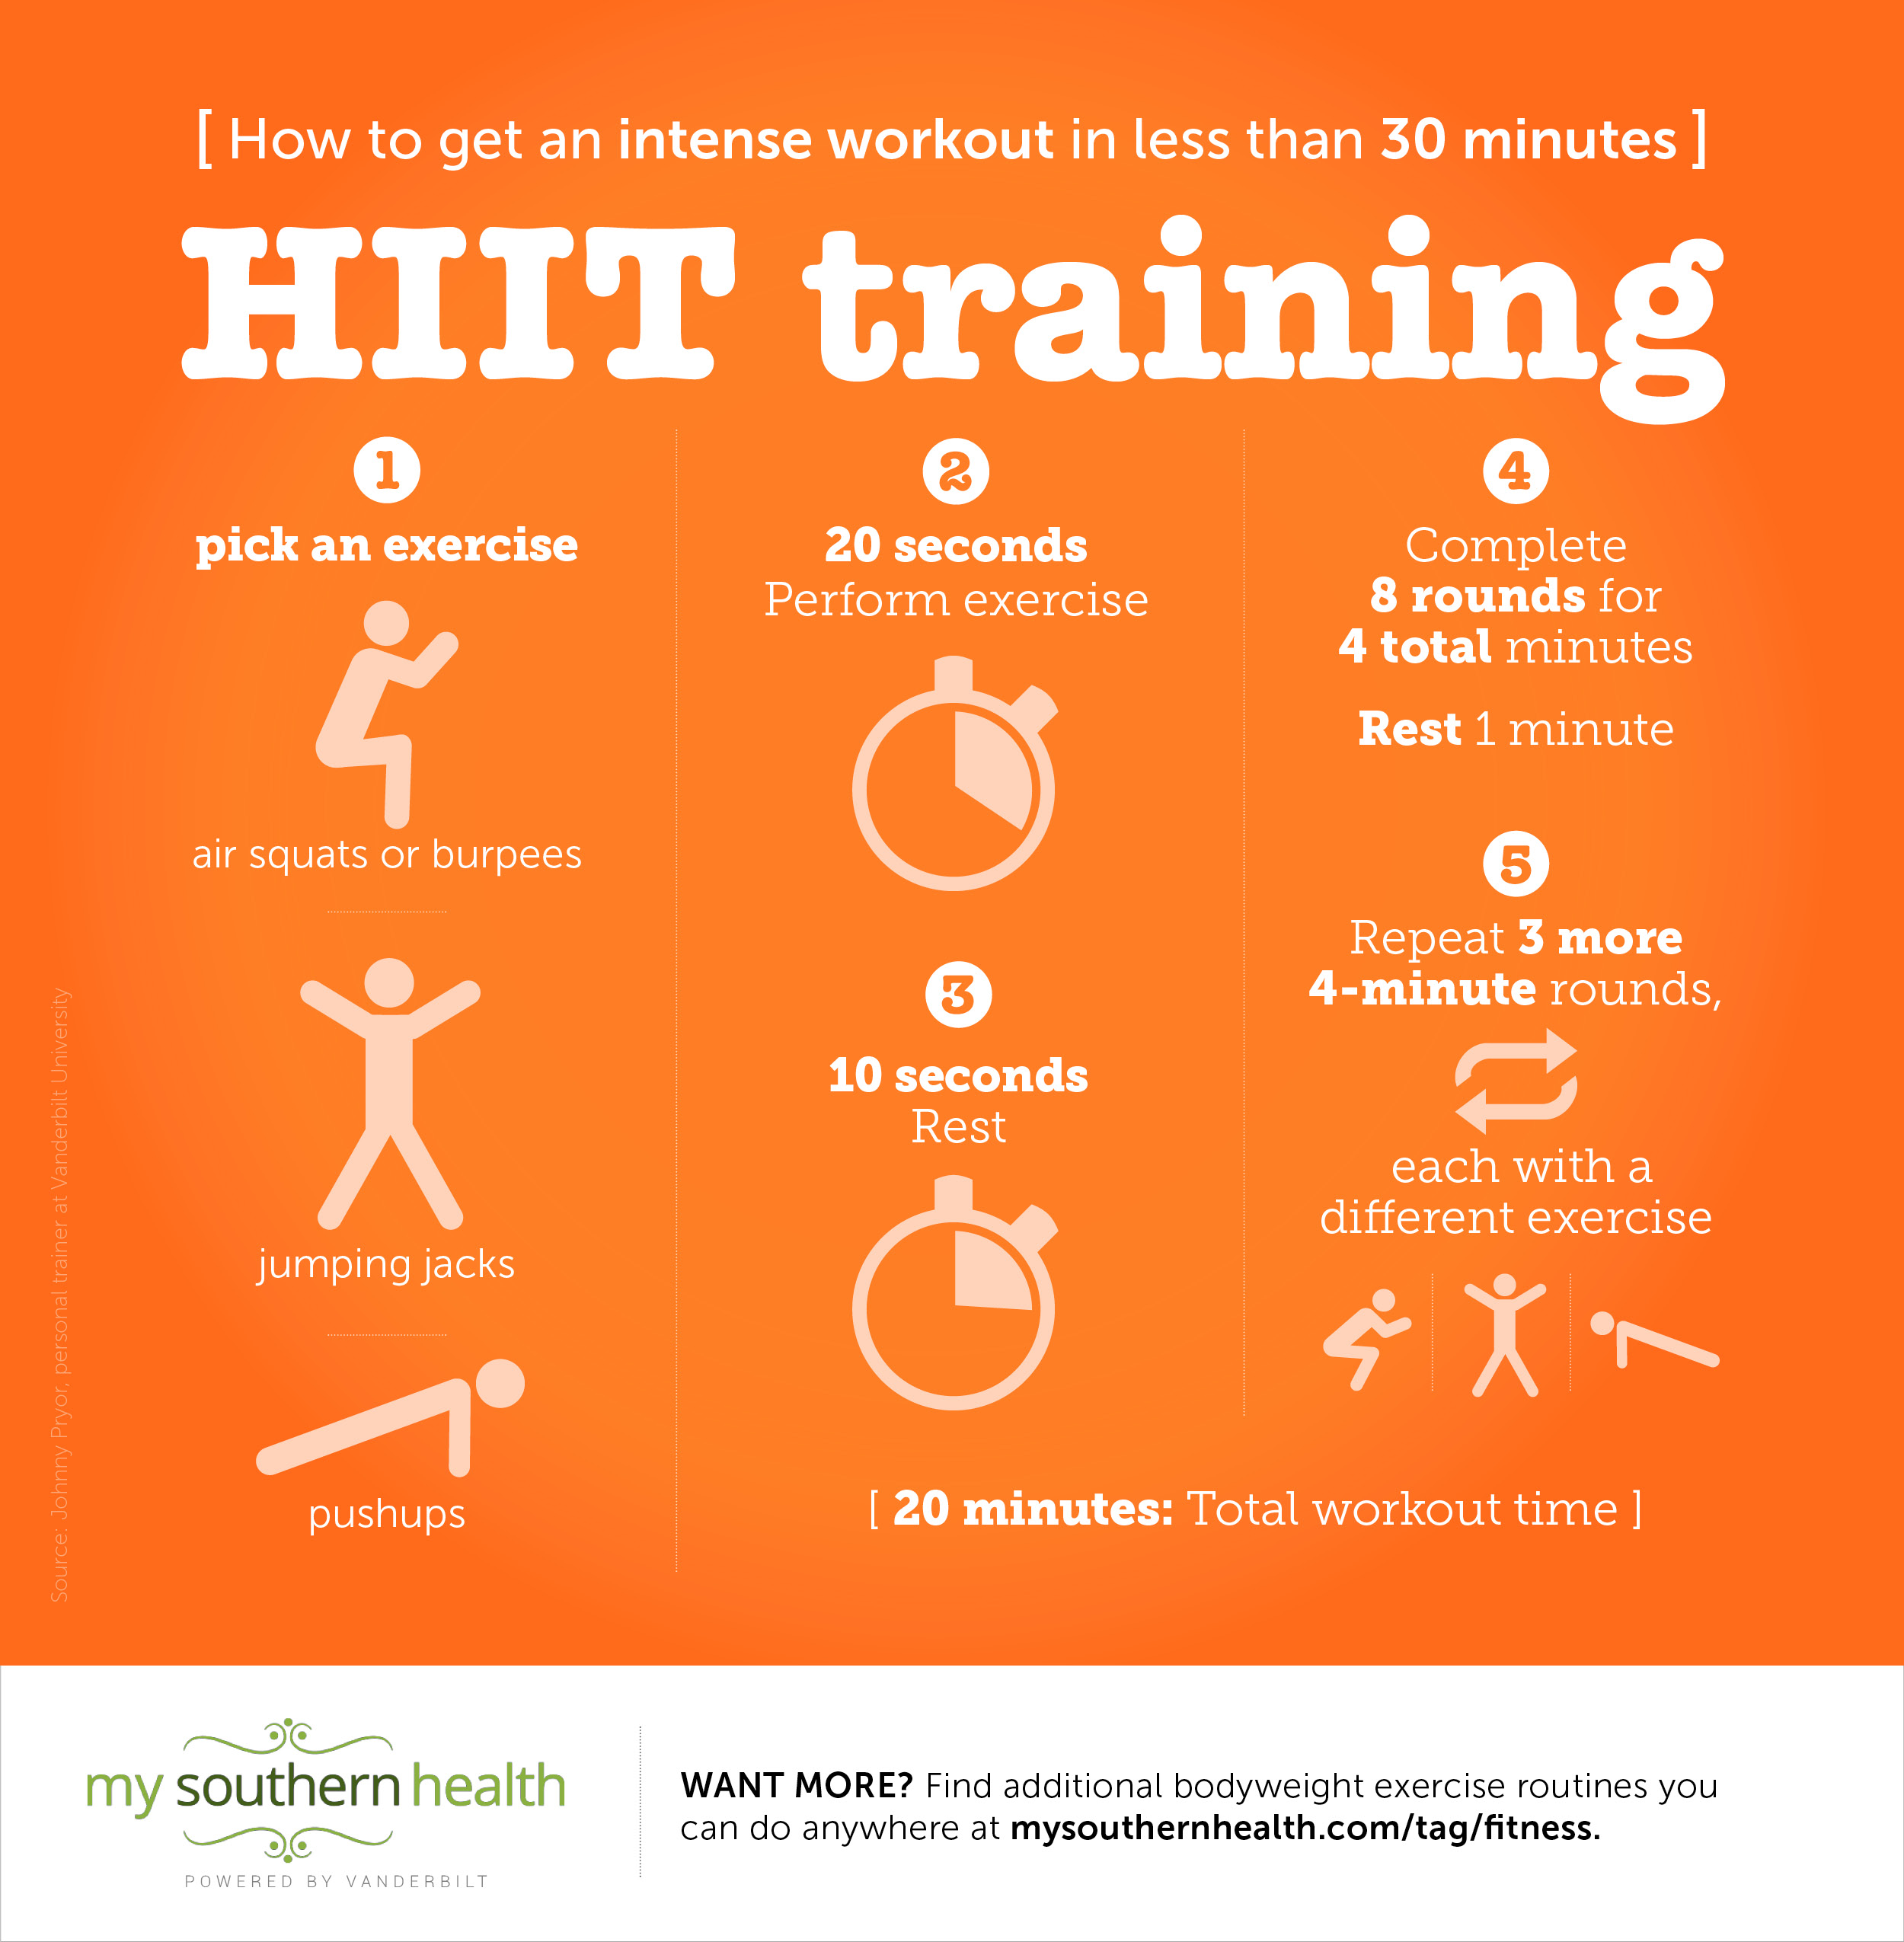 HIIT training tips for a 30 minute workout